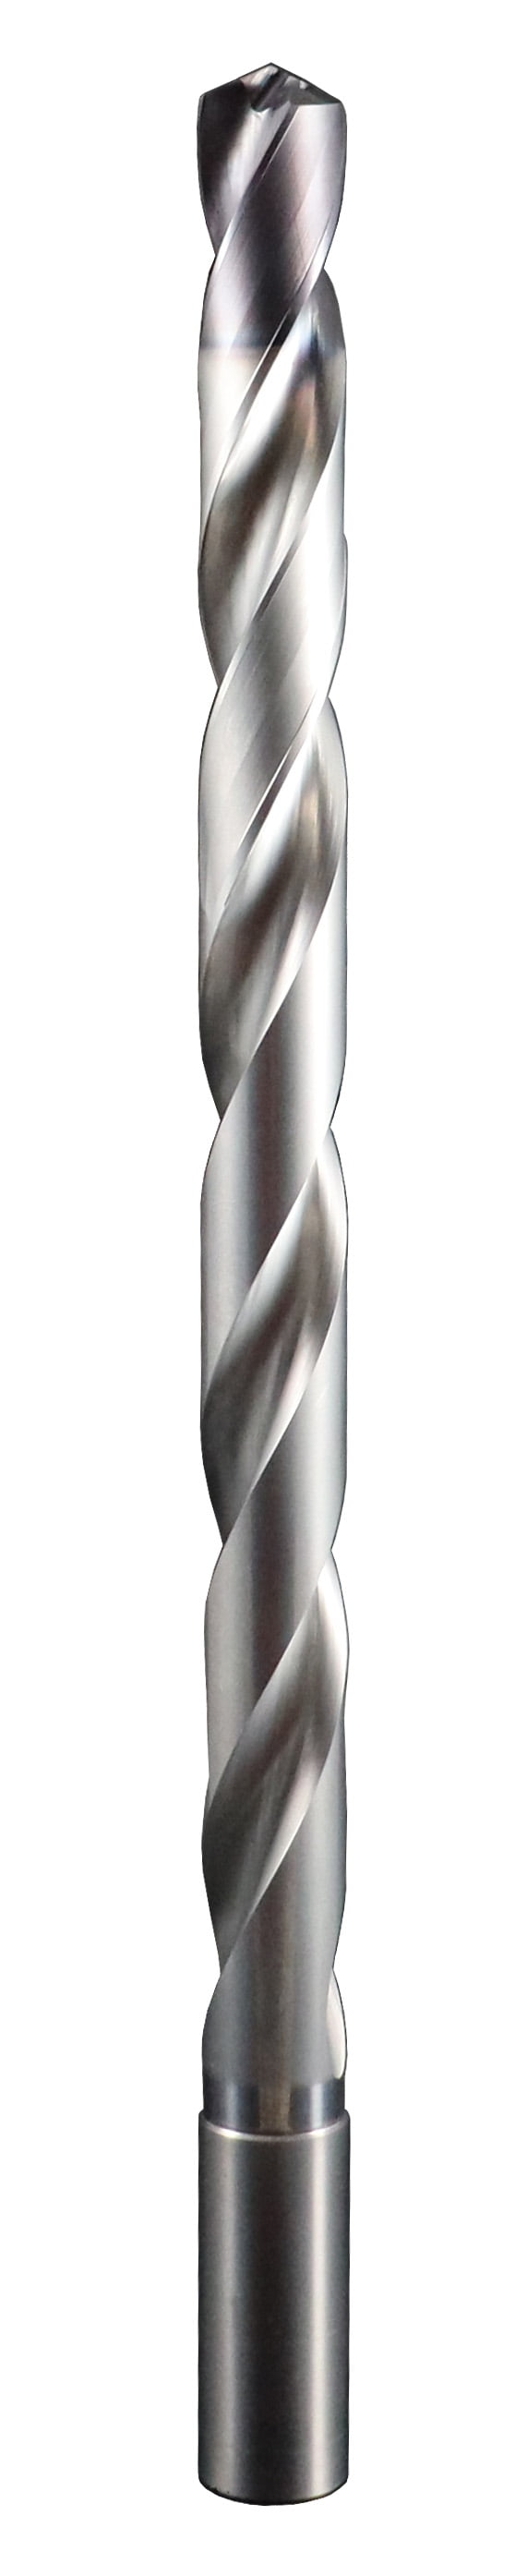 3.10mm Dia, 137 Degree Point, Solid Carbide Drill - 66710